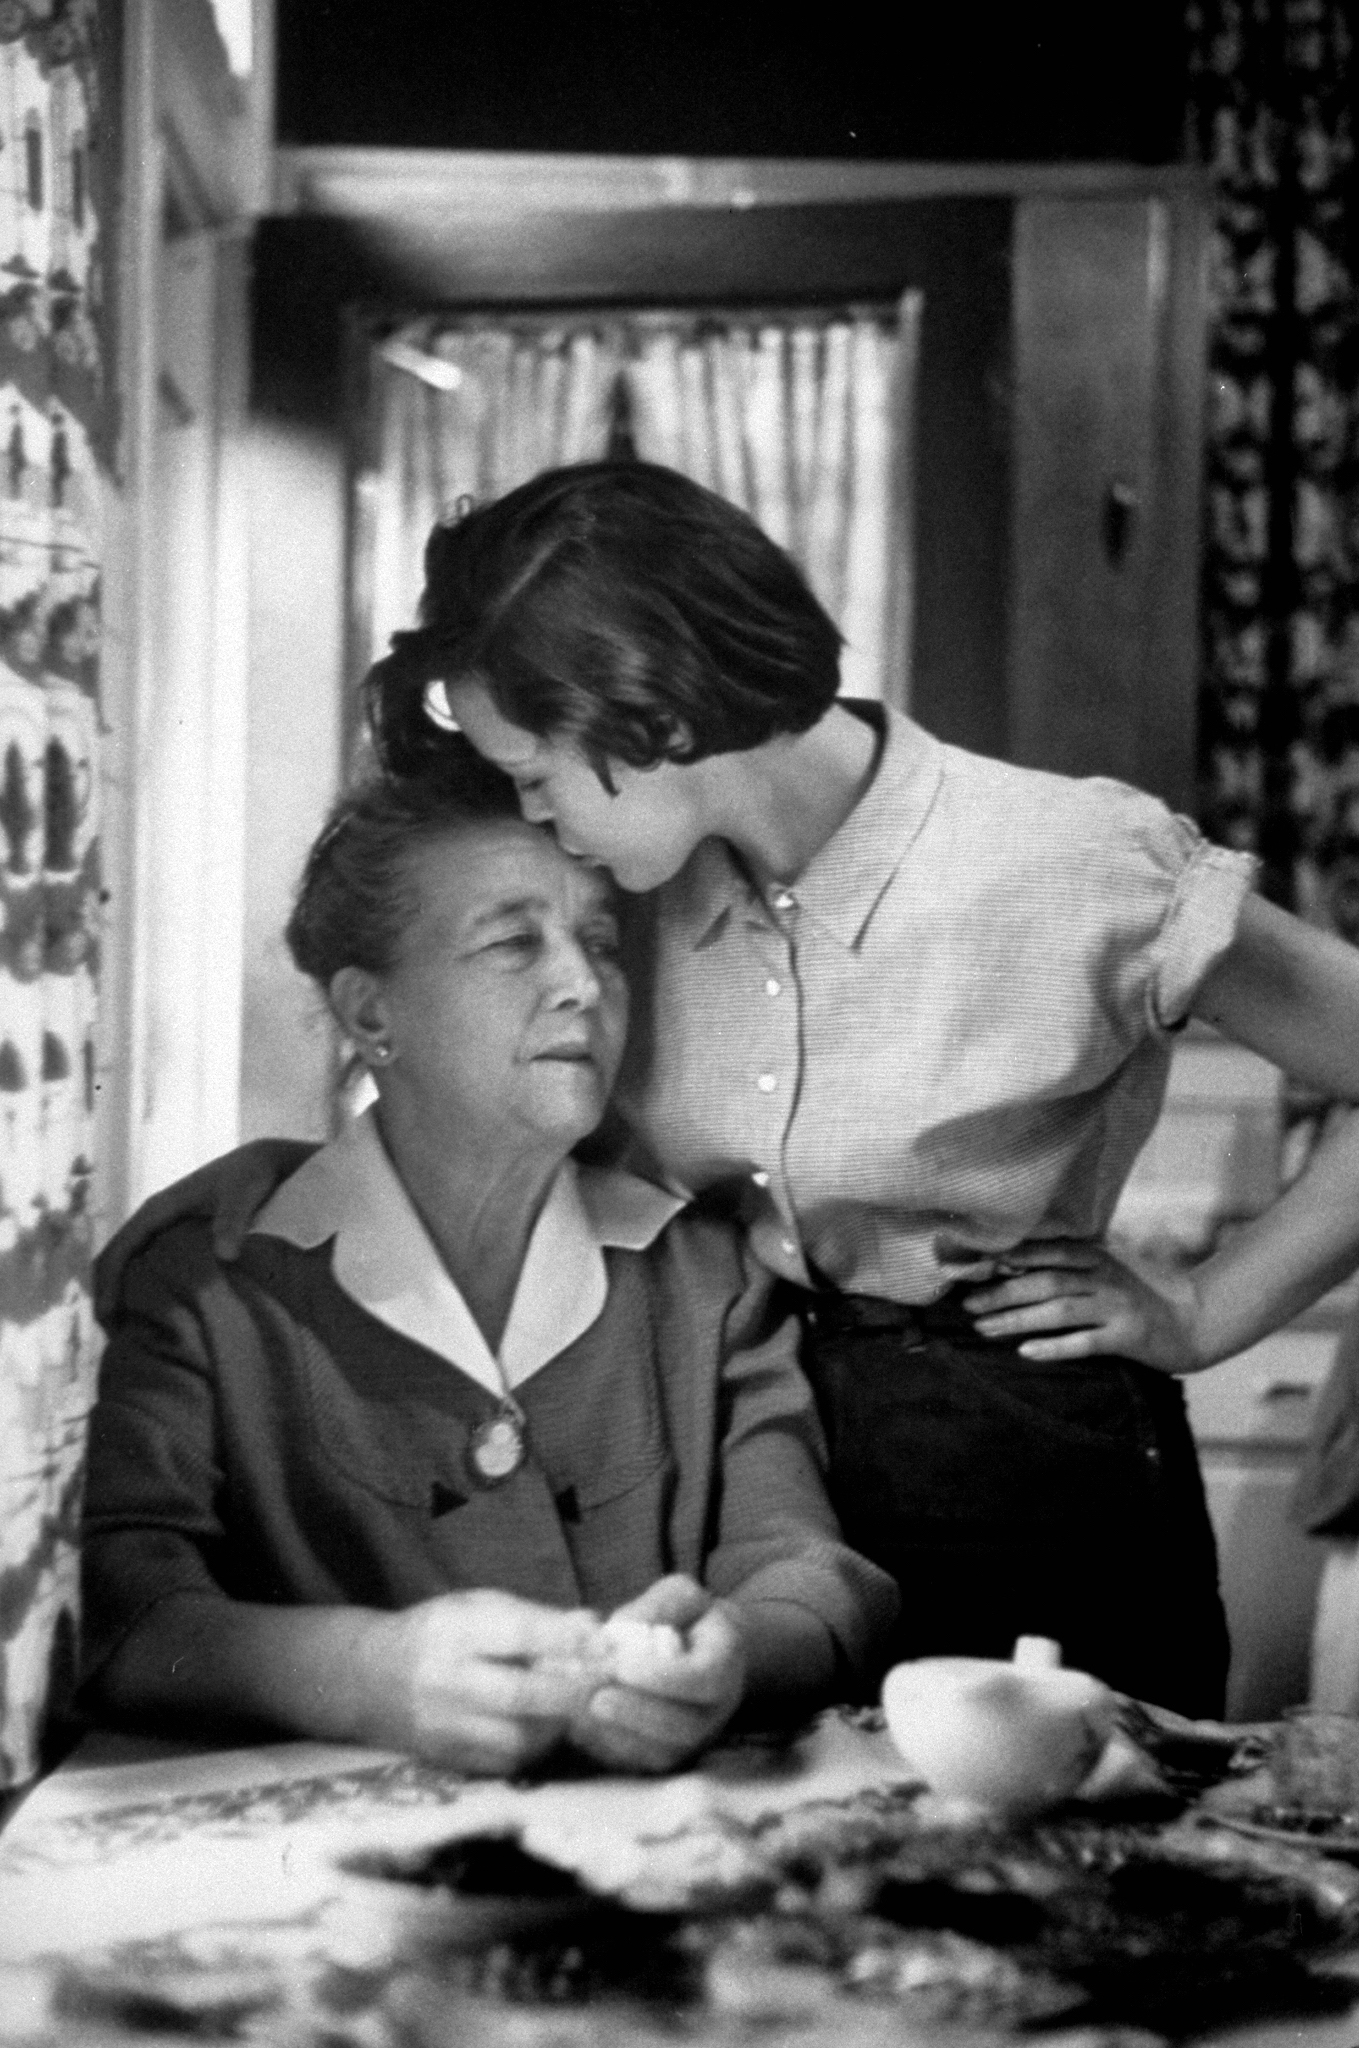 Jill Corey giving her grandmother, "Mamouch", a kiss on the forehead. 1953.